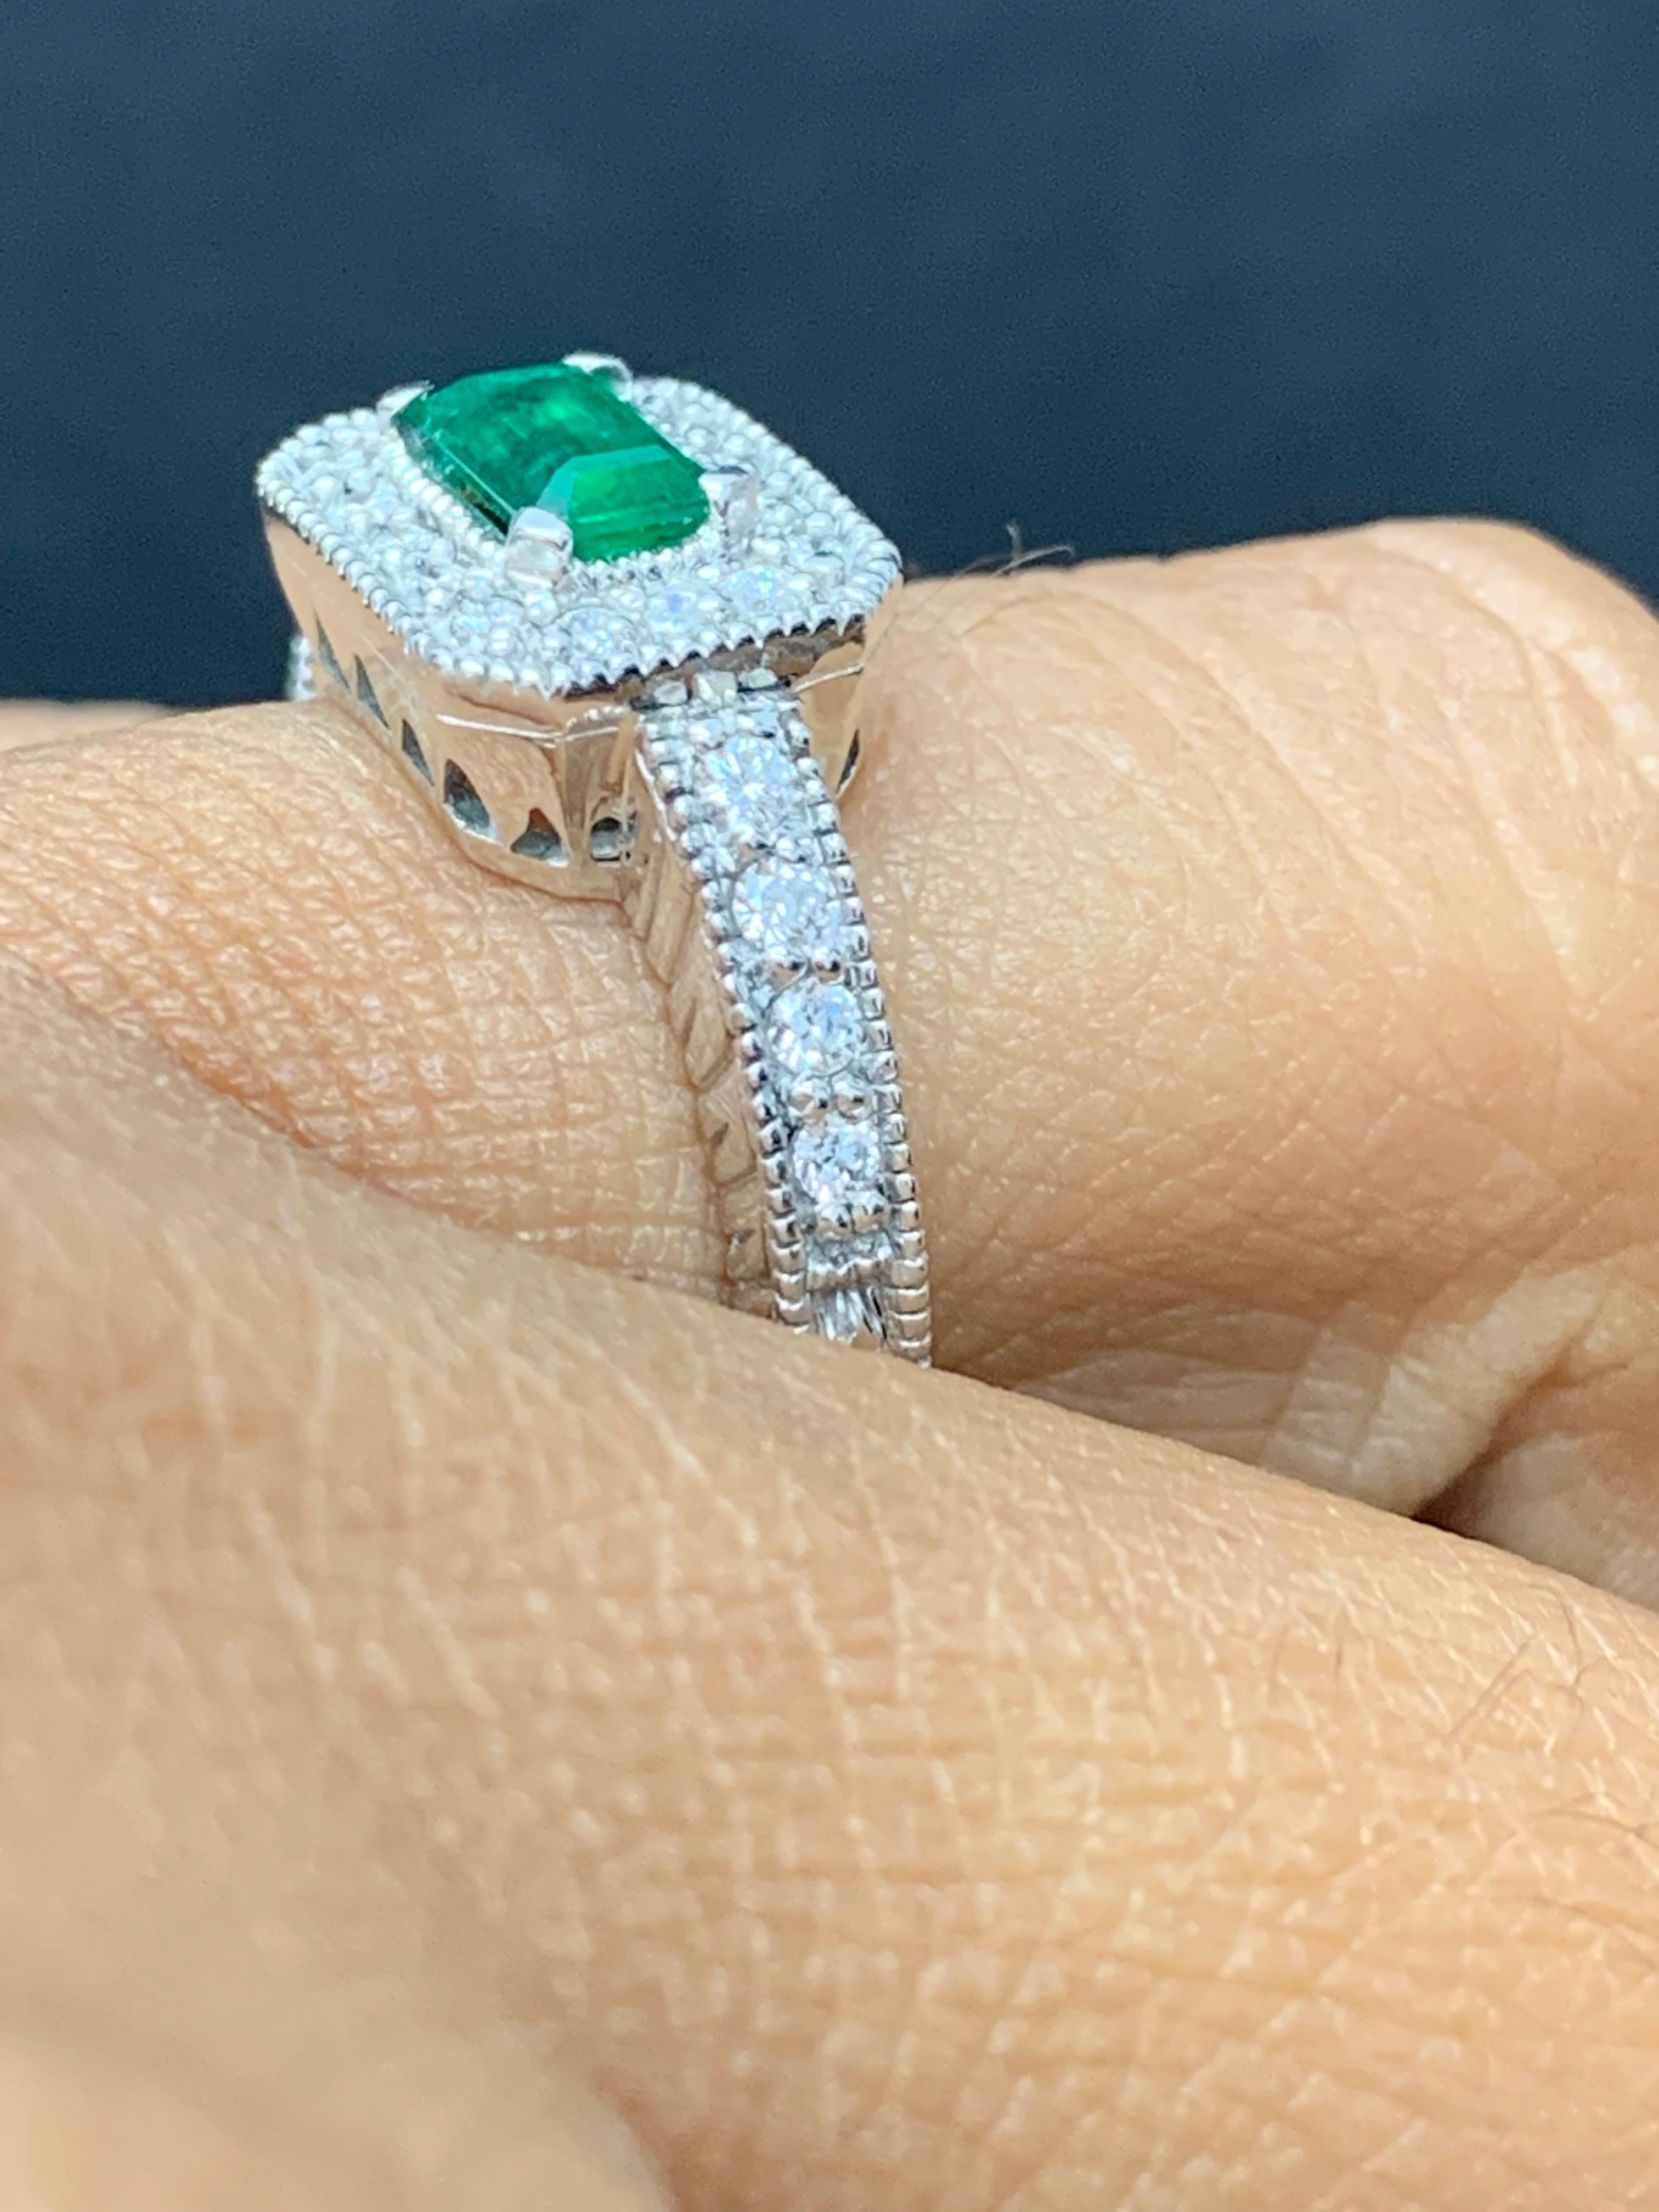 0.70 Carat Emerald-Cut Emerald and Diamond Ring in 14K White Gold For Sale 7